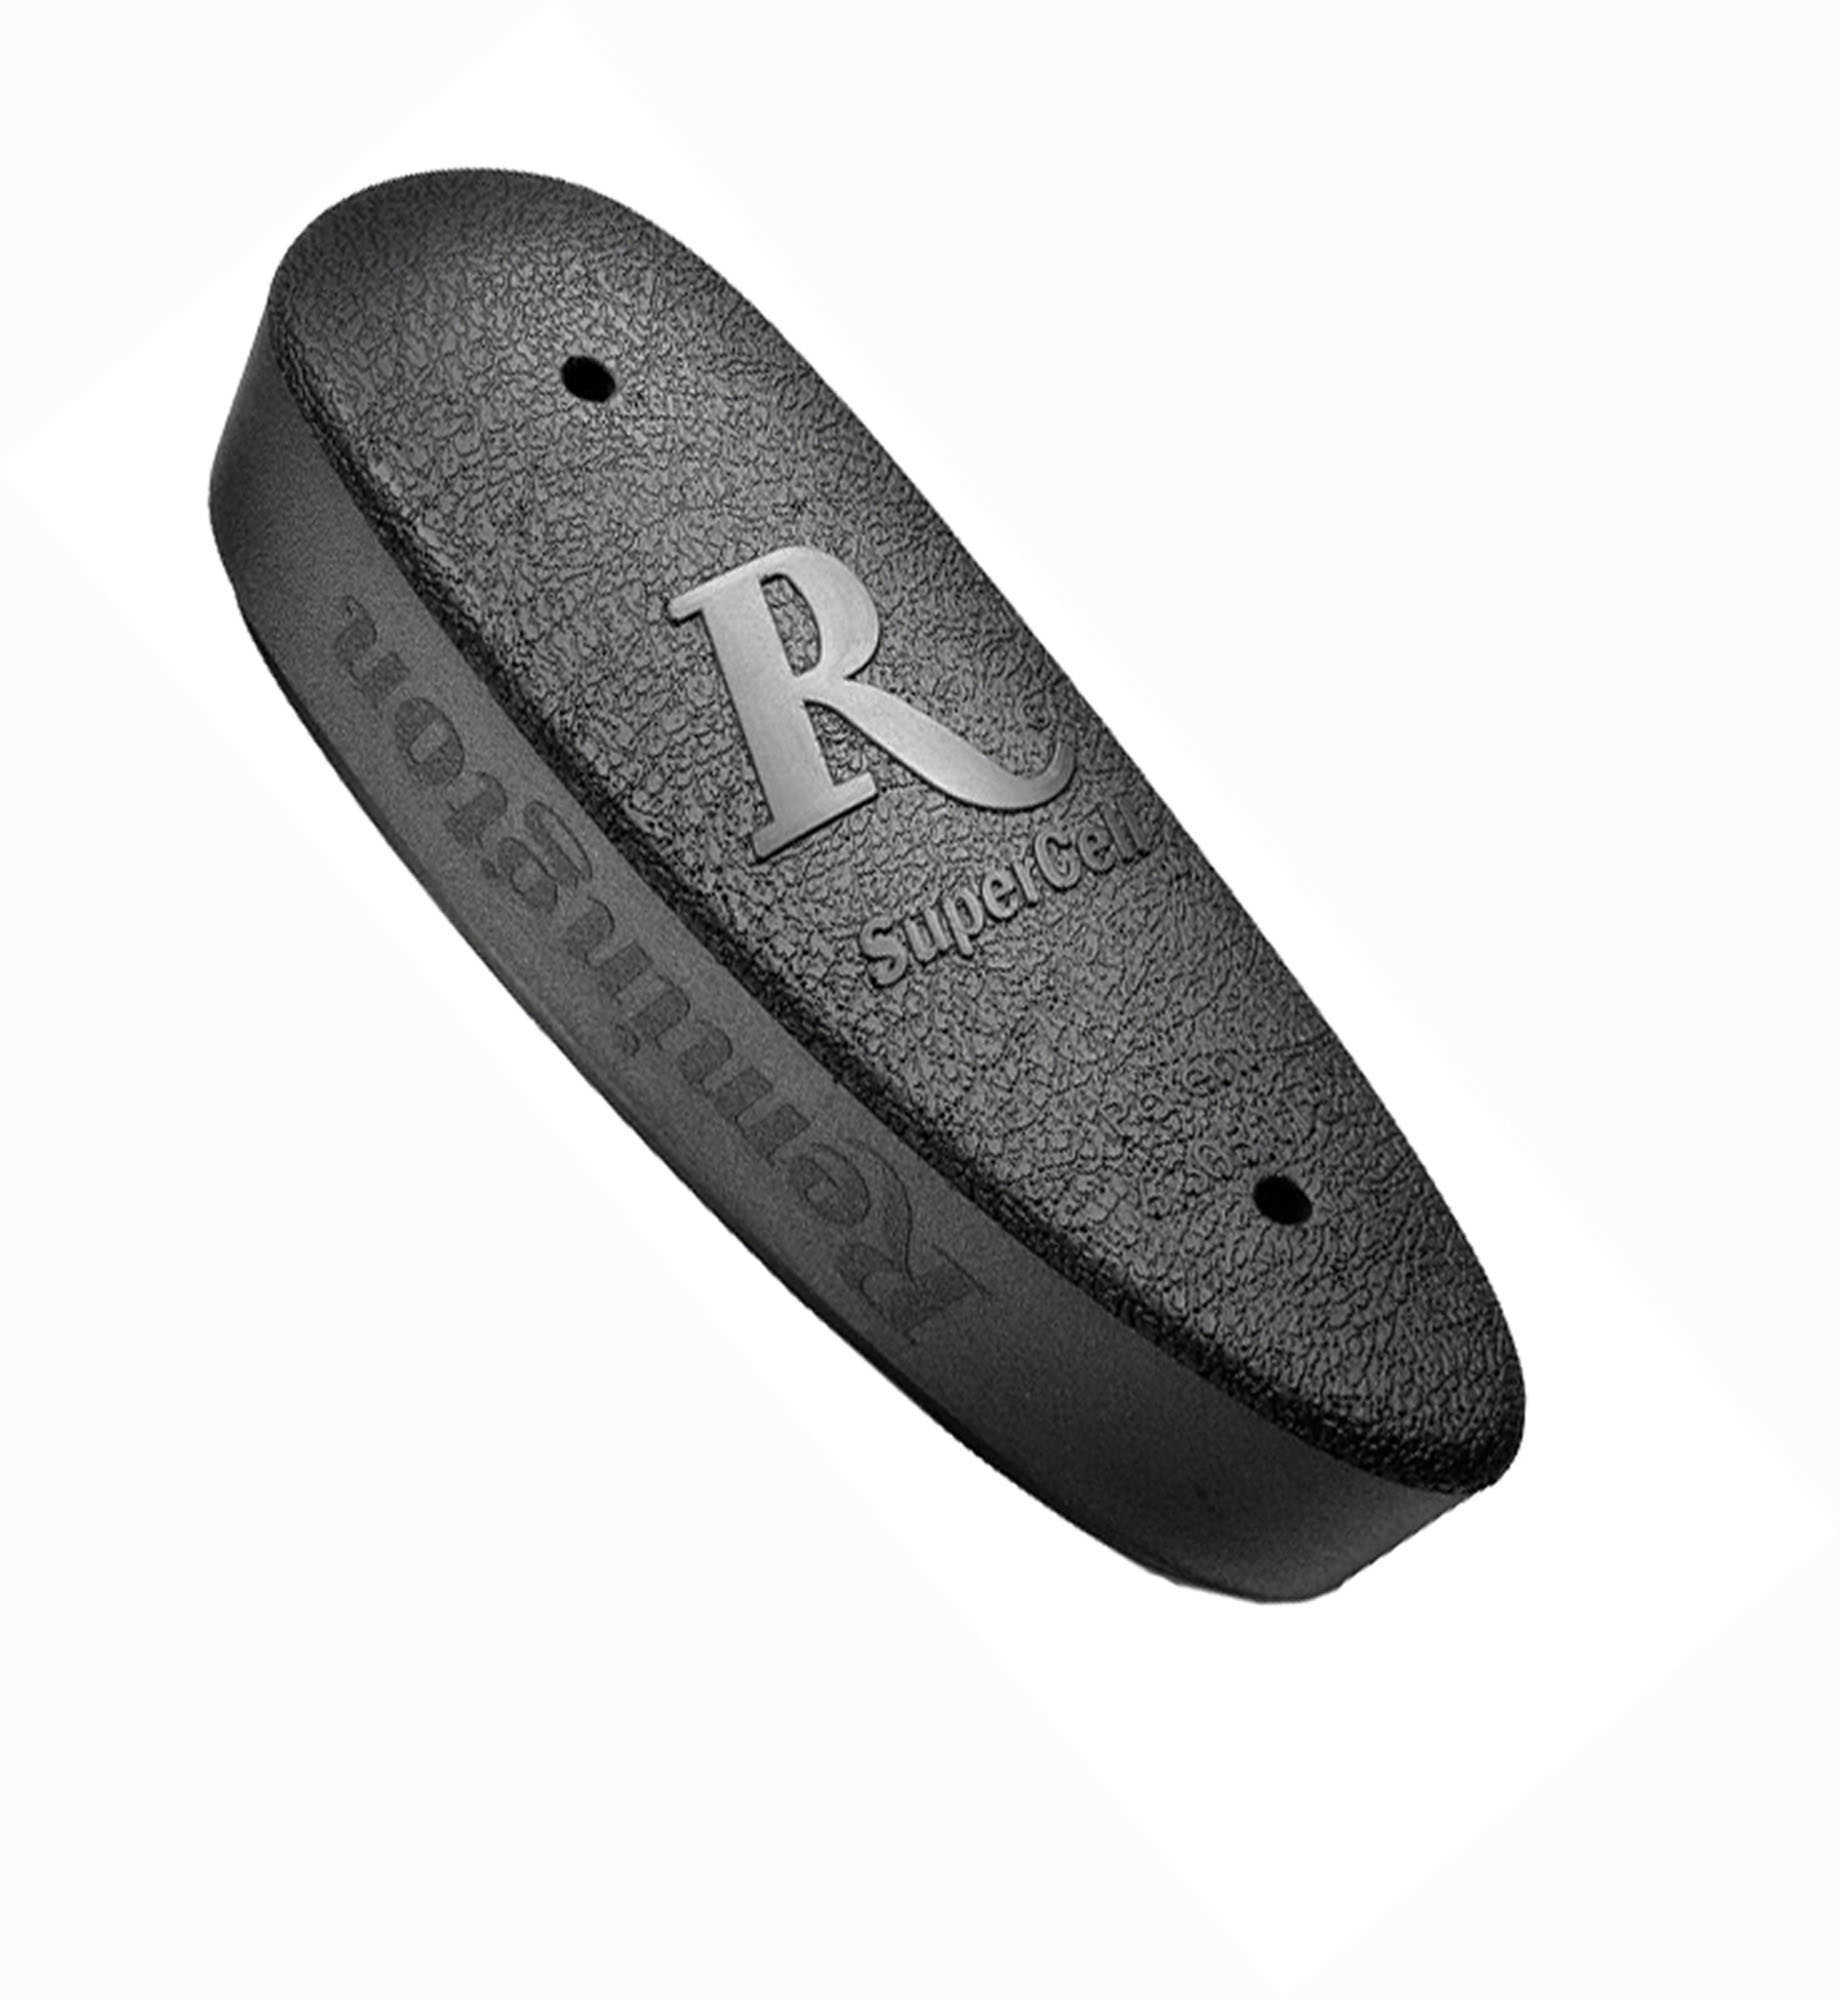 Remington Supercell Recoil Pad Fits M700 Synthetic Stocks Black Finish 19472